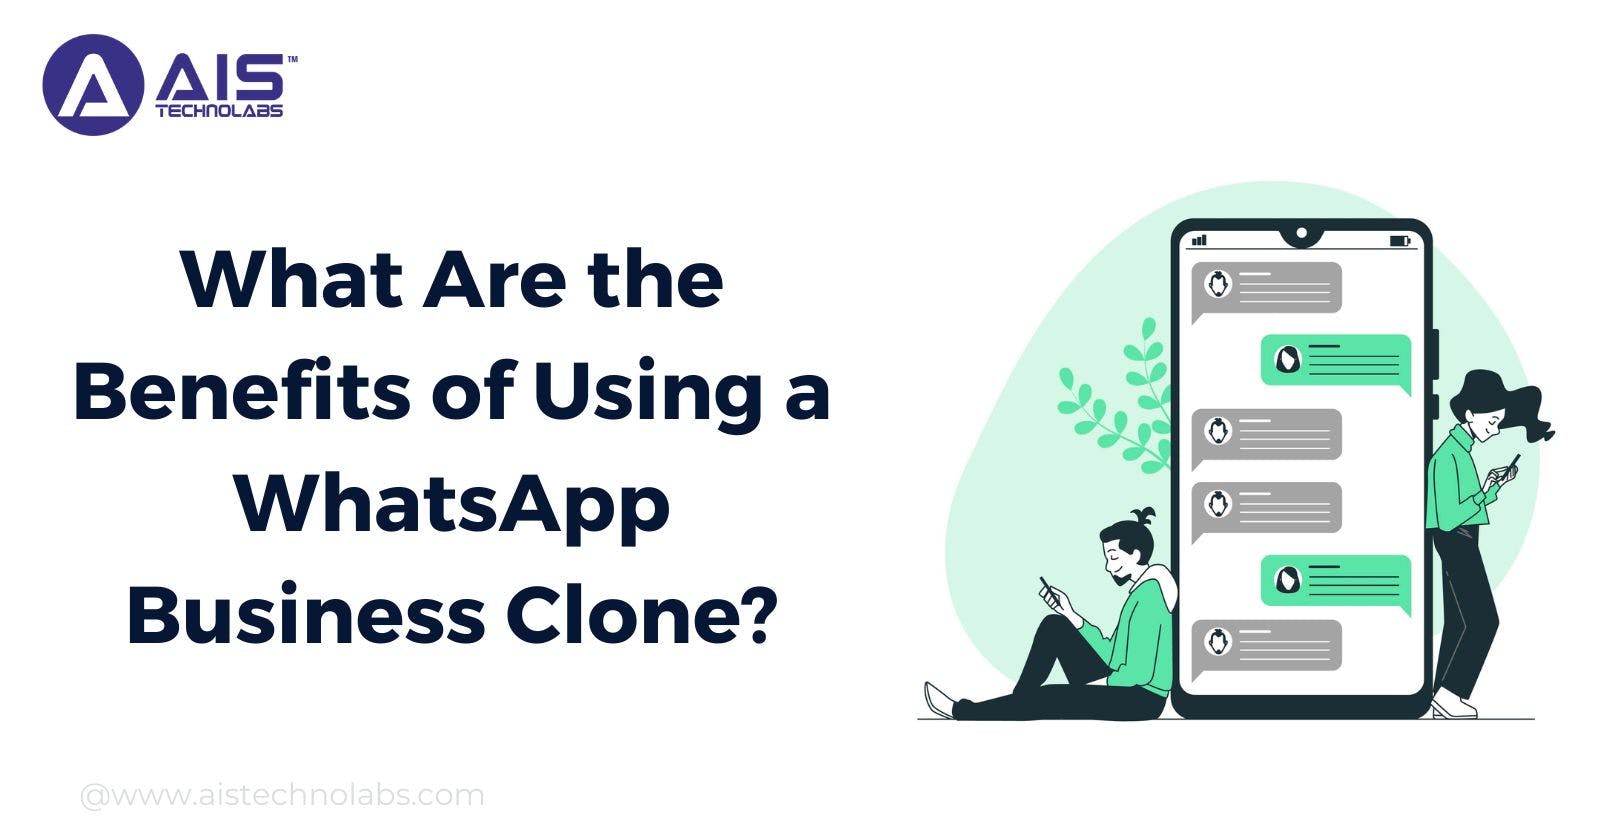 What Are the Benefits of Using a WhatsApp Business Clone?